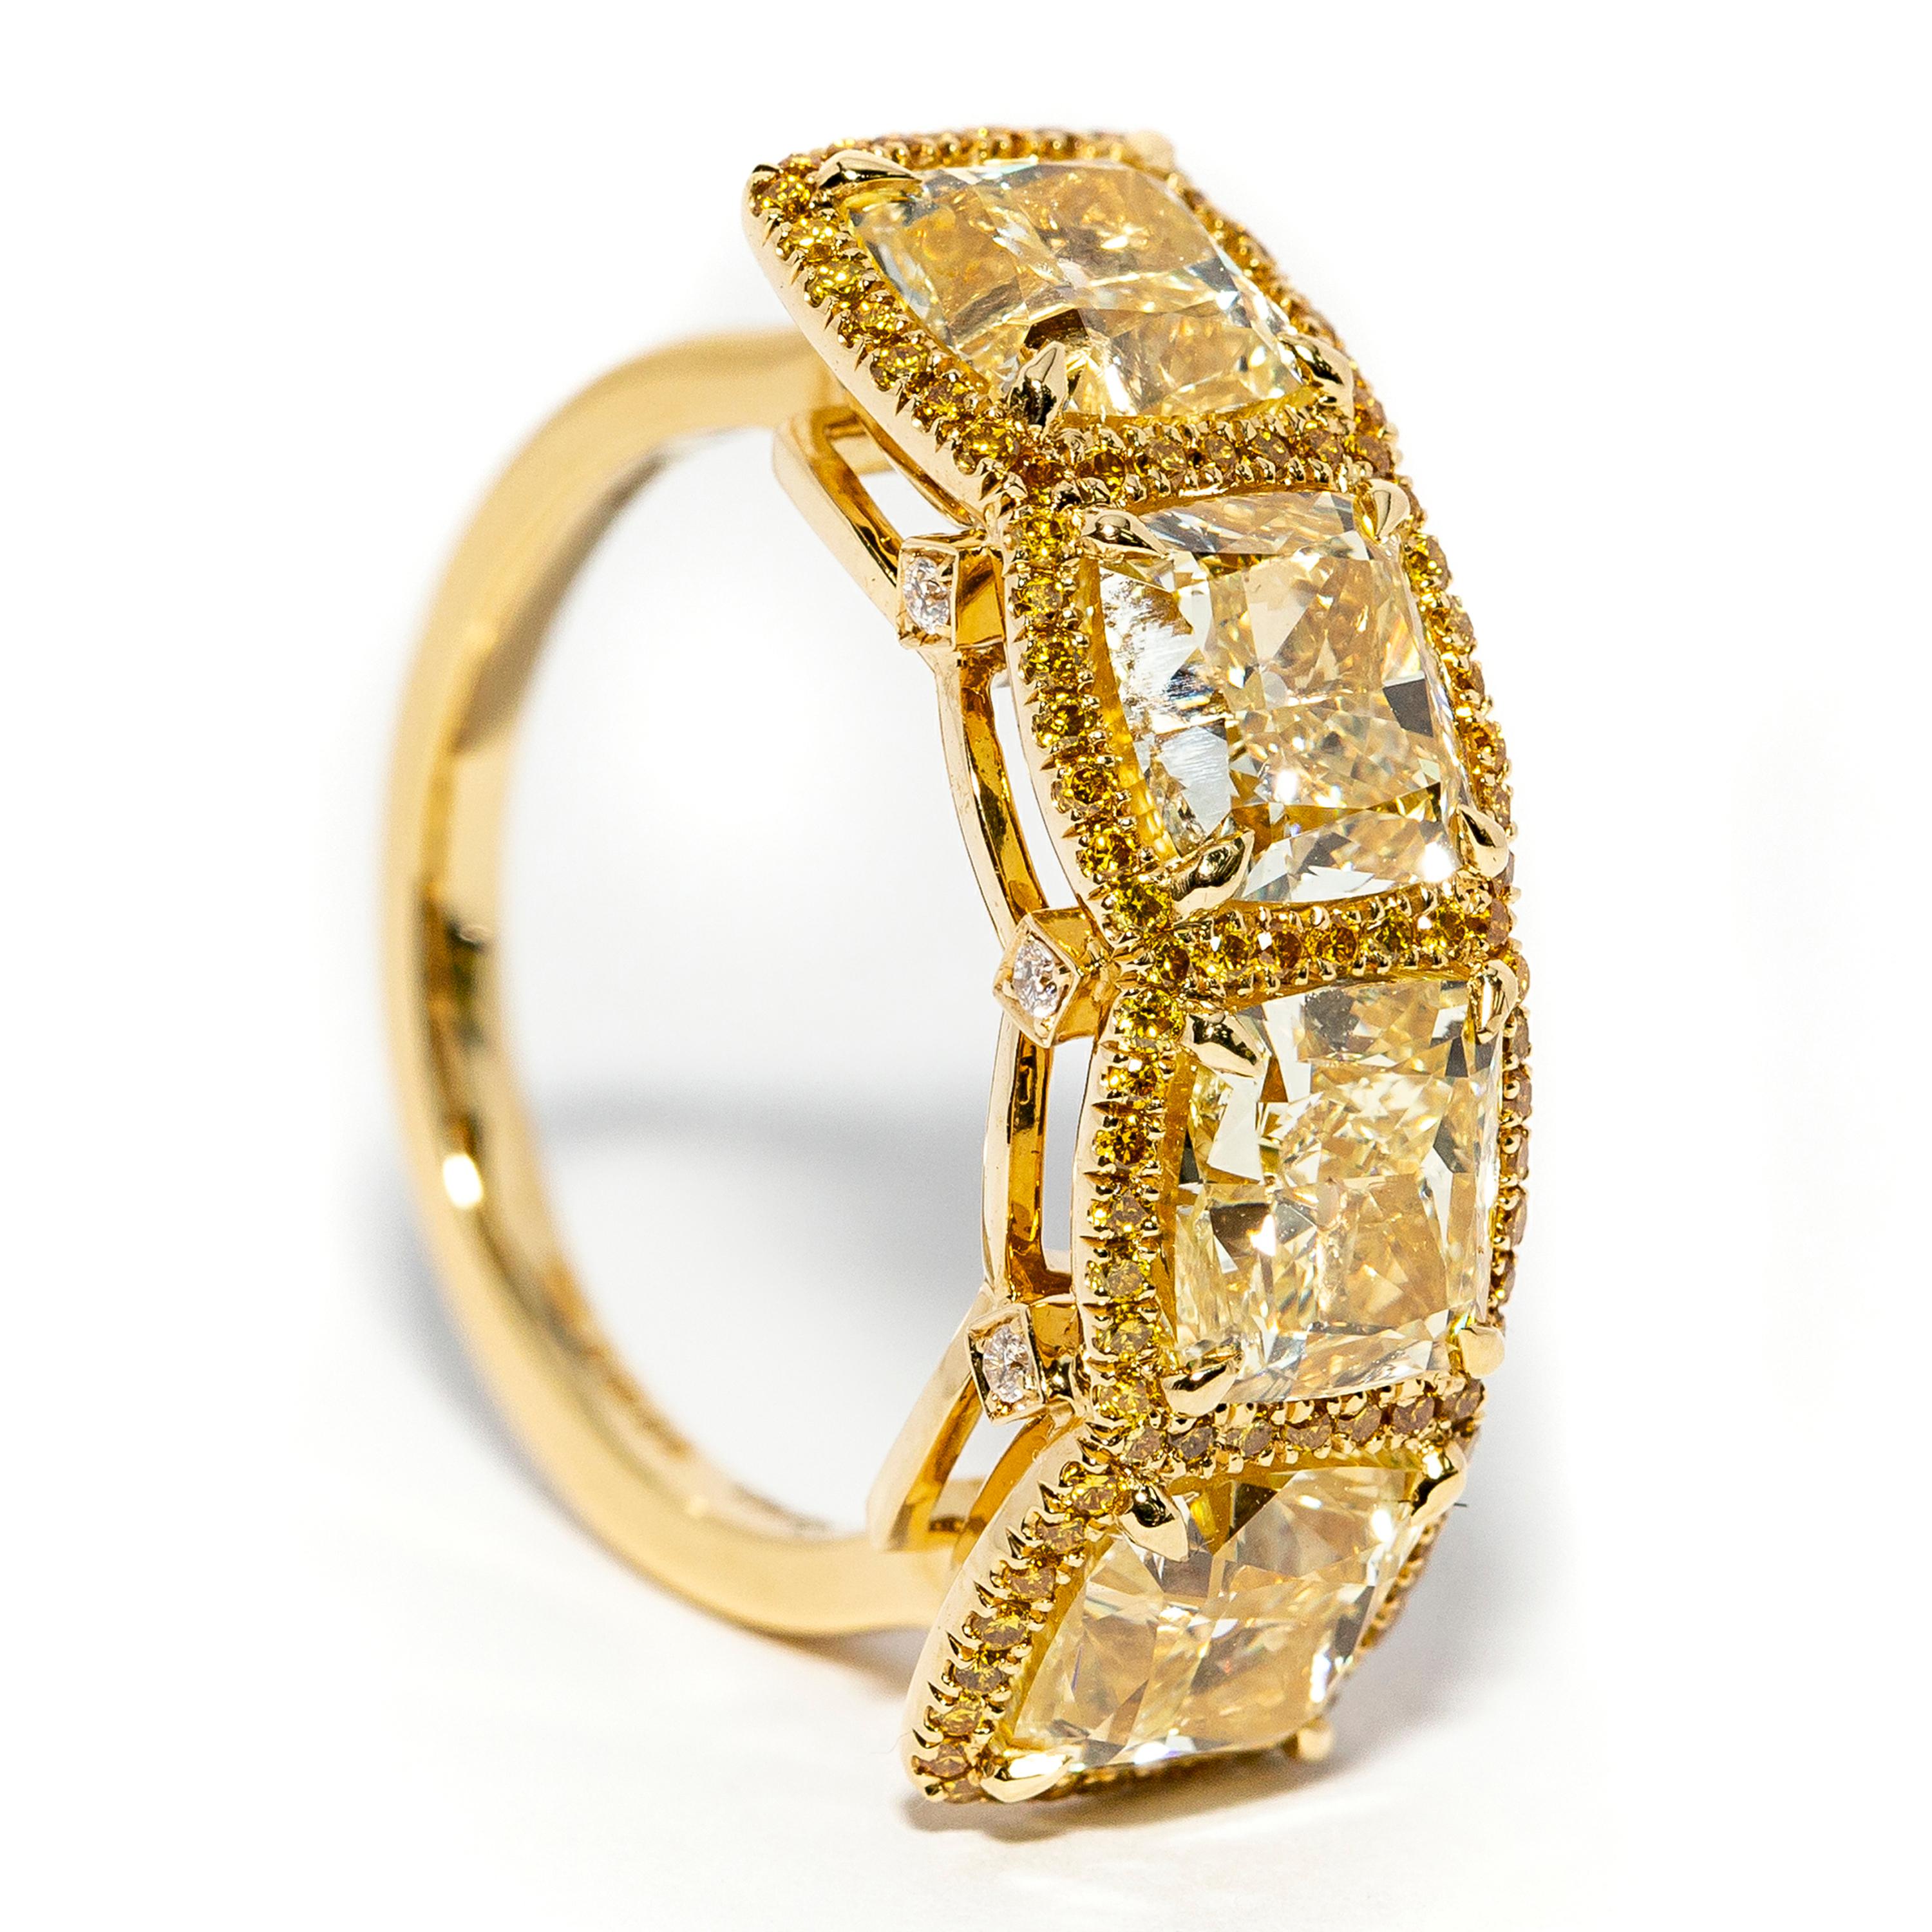 This gorgeous 6.80 Carat Cushion Cut Ring Color Y-Z Clarity VS2 featuring 0.36 Carat of Round Fancy Yellow Diamonds Clarity SI1 set in Halo Design around the larger stones and 3 small white stones on each side of the mount, Adding timeless glamour